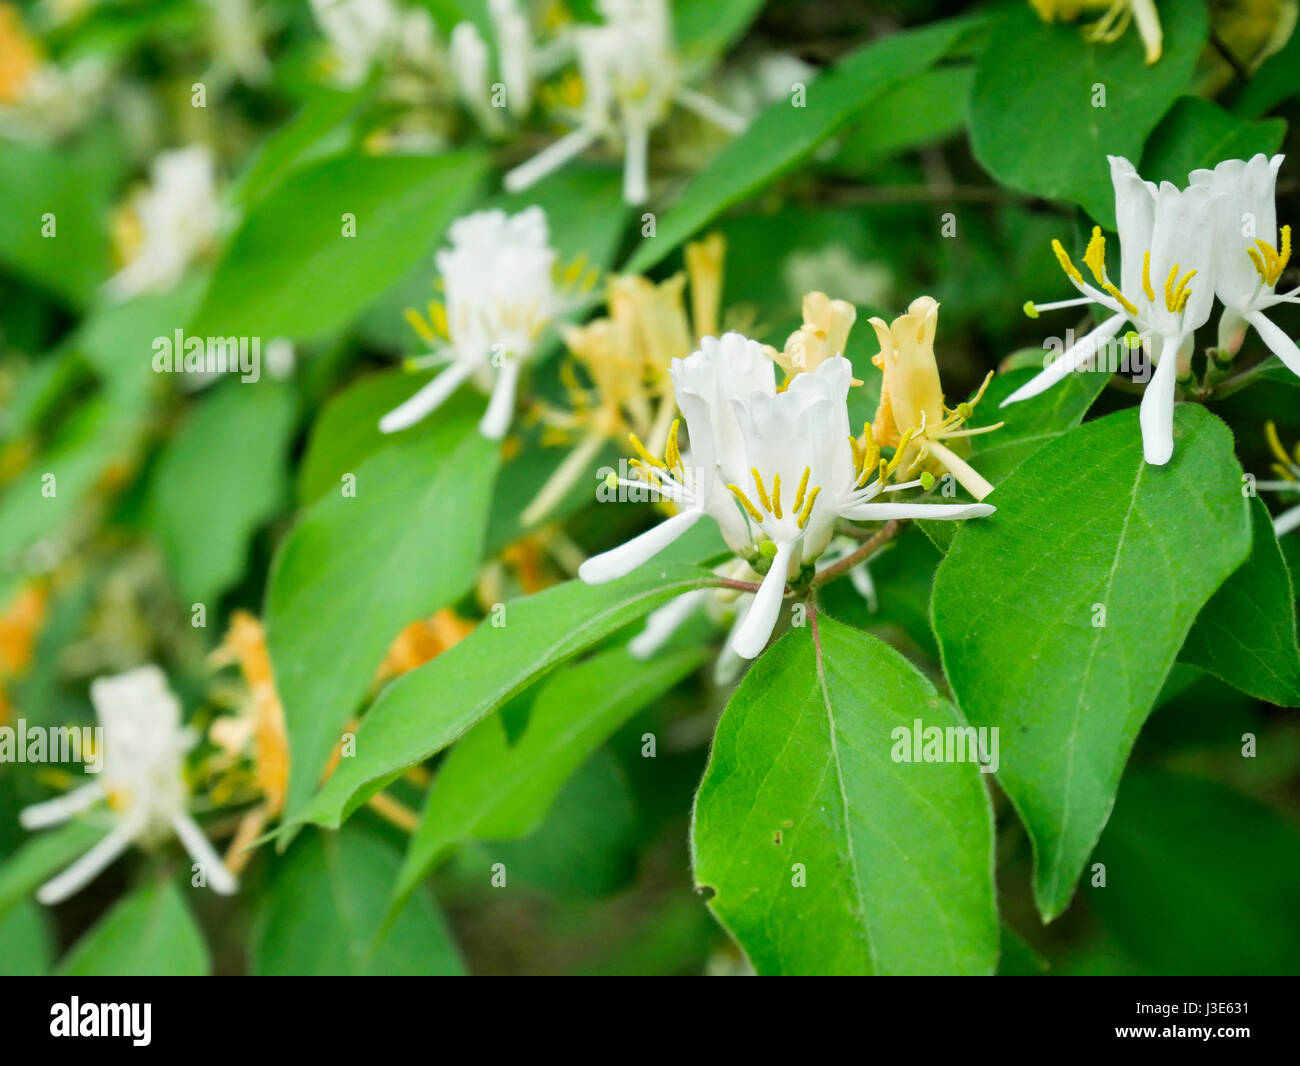 Amur honysuckle (Lonicera maackii) Native to Asia, extremely invasive in eastern USA and Canada. Stock Photo